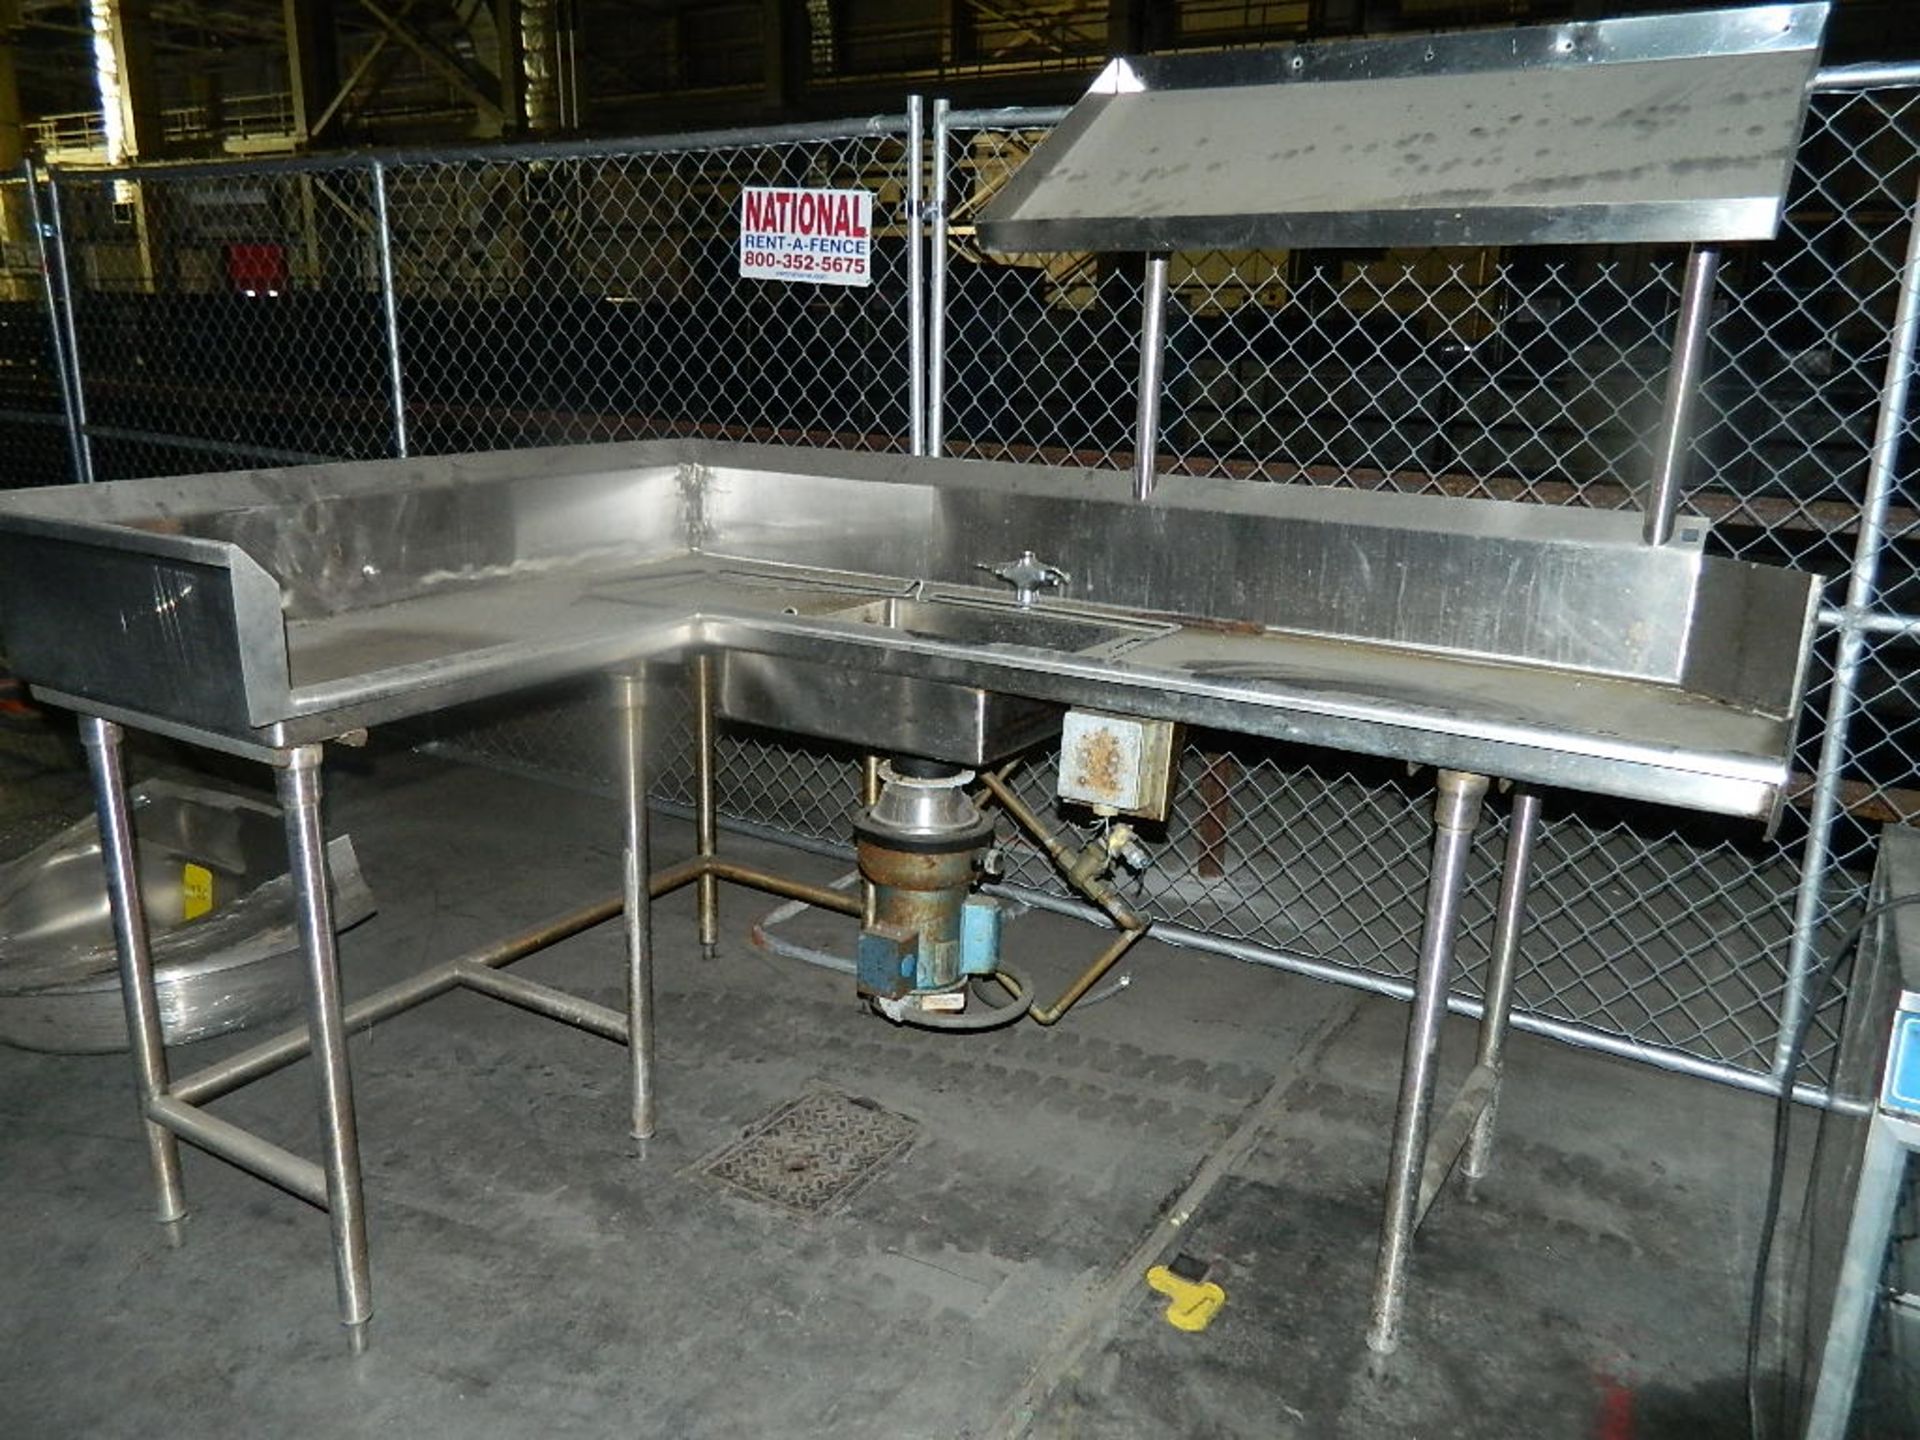 STAINLESS STEEL SINK WITH GARBAGE DISPOSAL